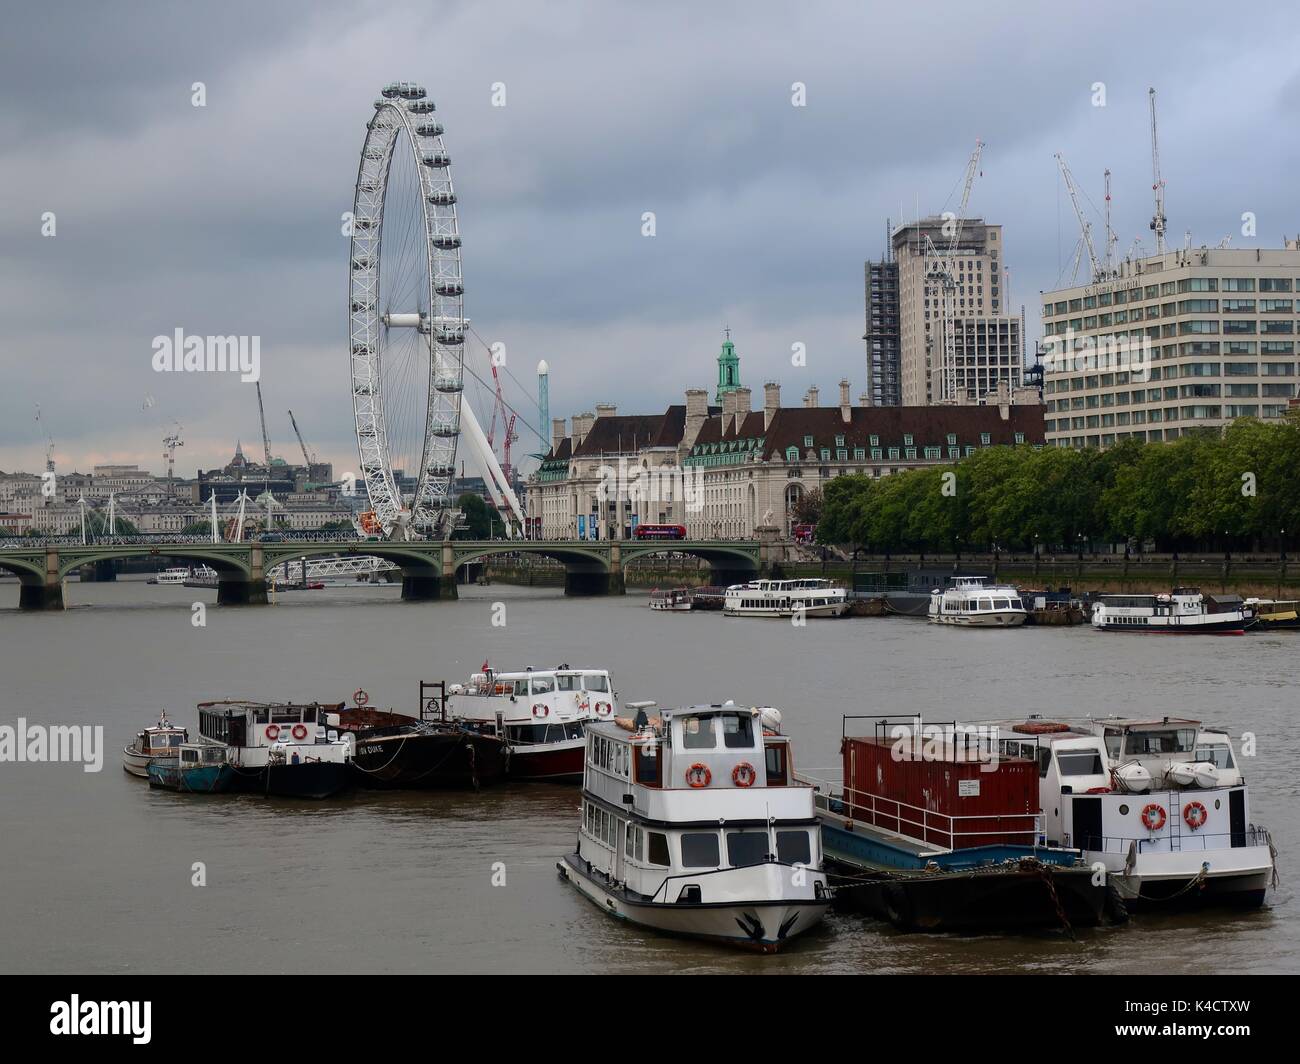 A view of the London Eye, County Hall and Westminster Bridge taken from Lambeth Bridge. London, UK. Stock Photo